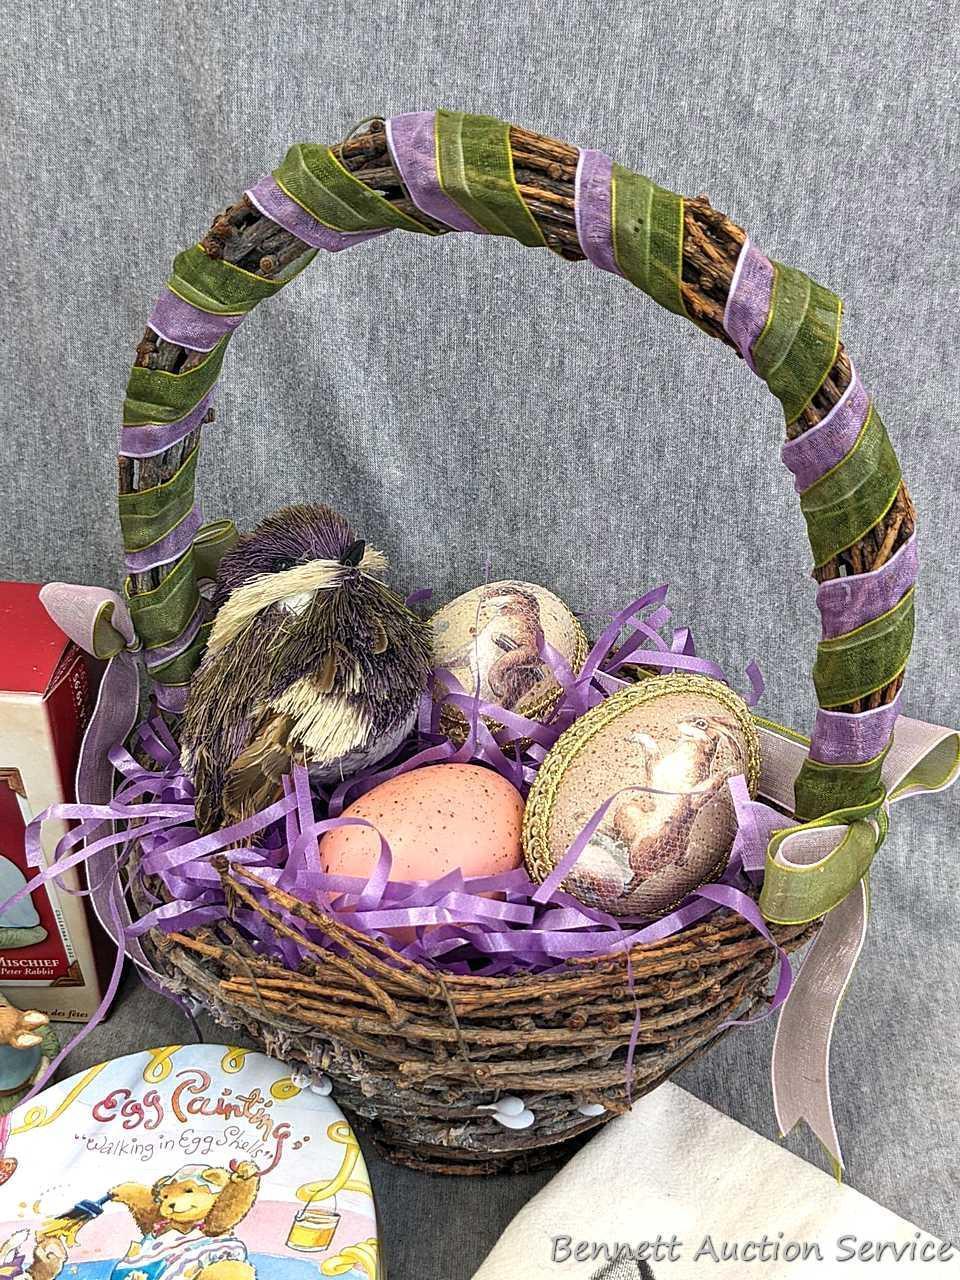 Easter holiday decorations incl Island Lavender tea towel, Norwex window cloth, crocheted washcloth,